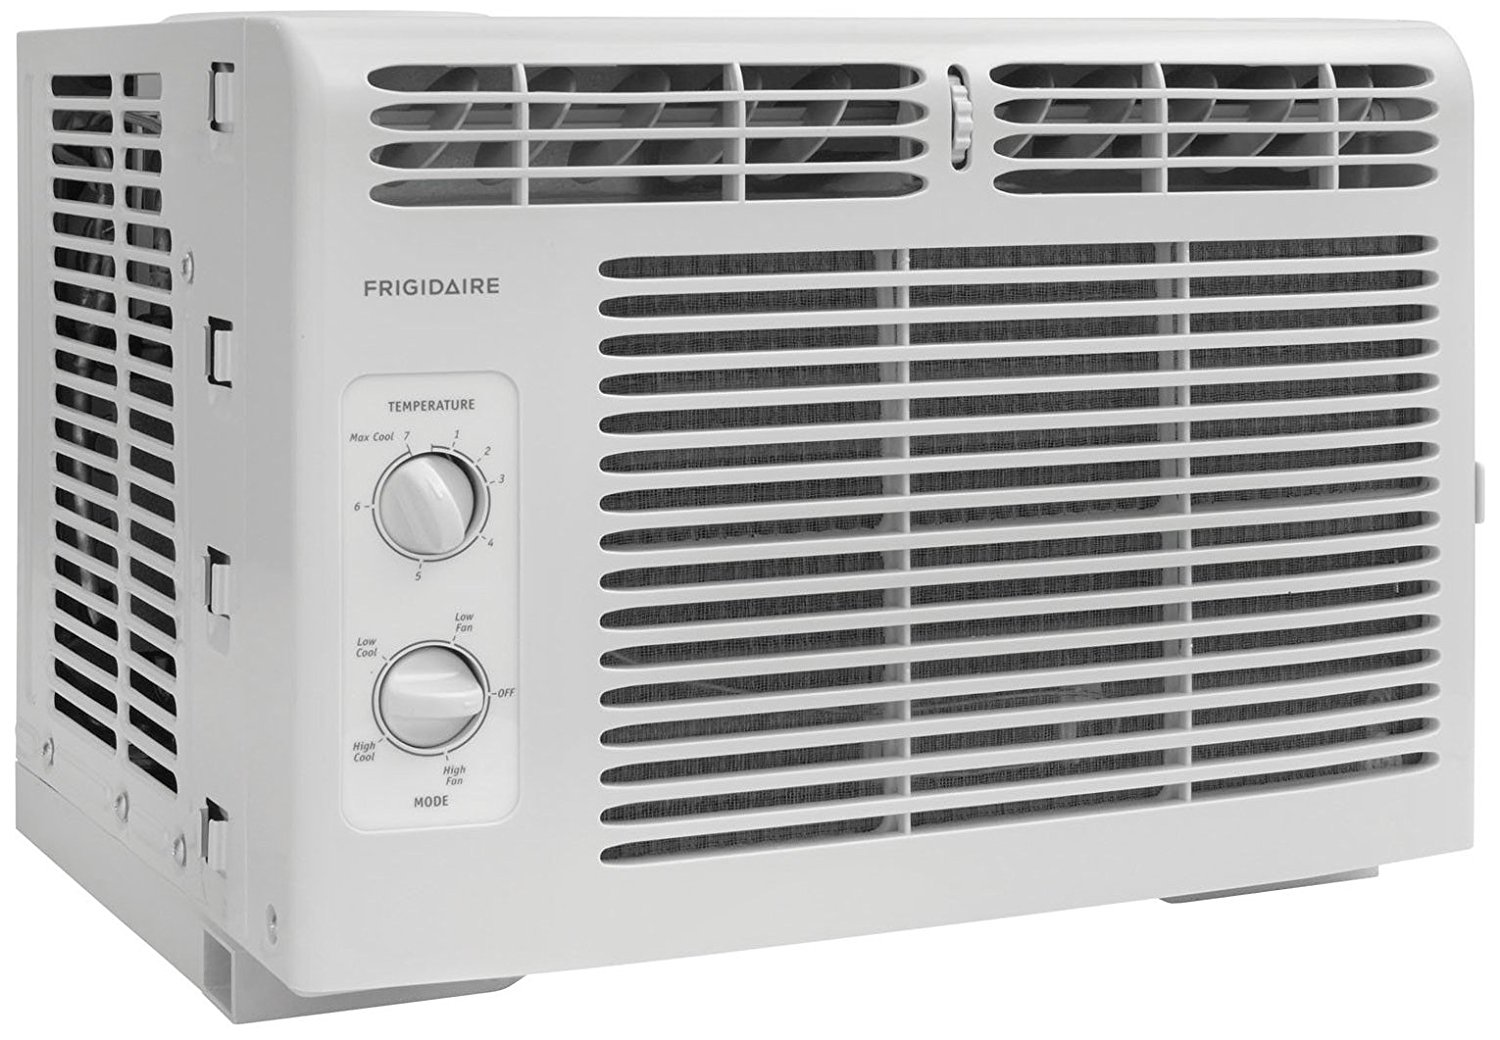 Review of Frigidaire FFRA0511R1 5, 000 BTU 115V Window-Mounted Mini-Compact Air Conditioner with Mechanical Controls